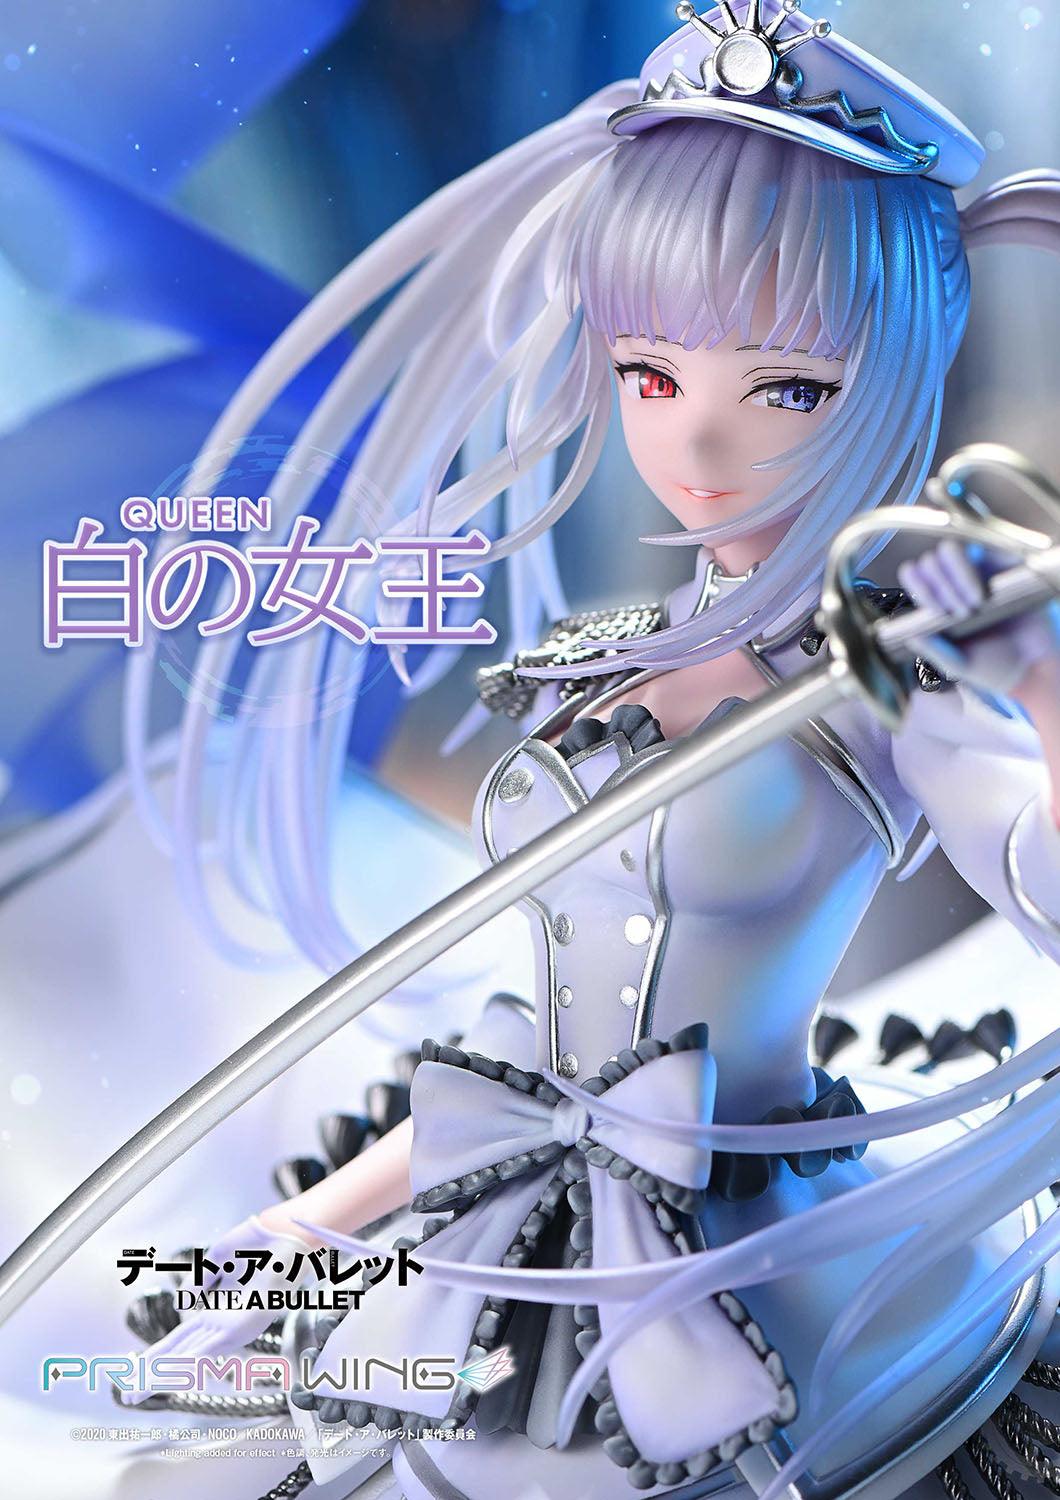 Prime 1 Studio PRISMA WING Date A Bullet - White Queen 1/7 scale - SaQra Mart Hobby